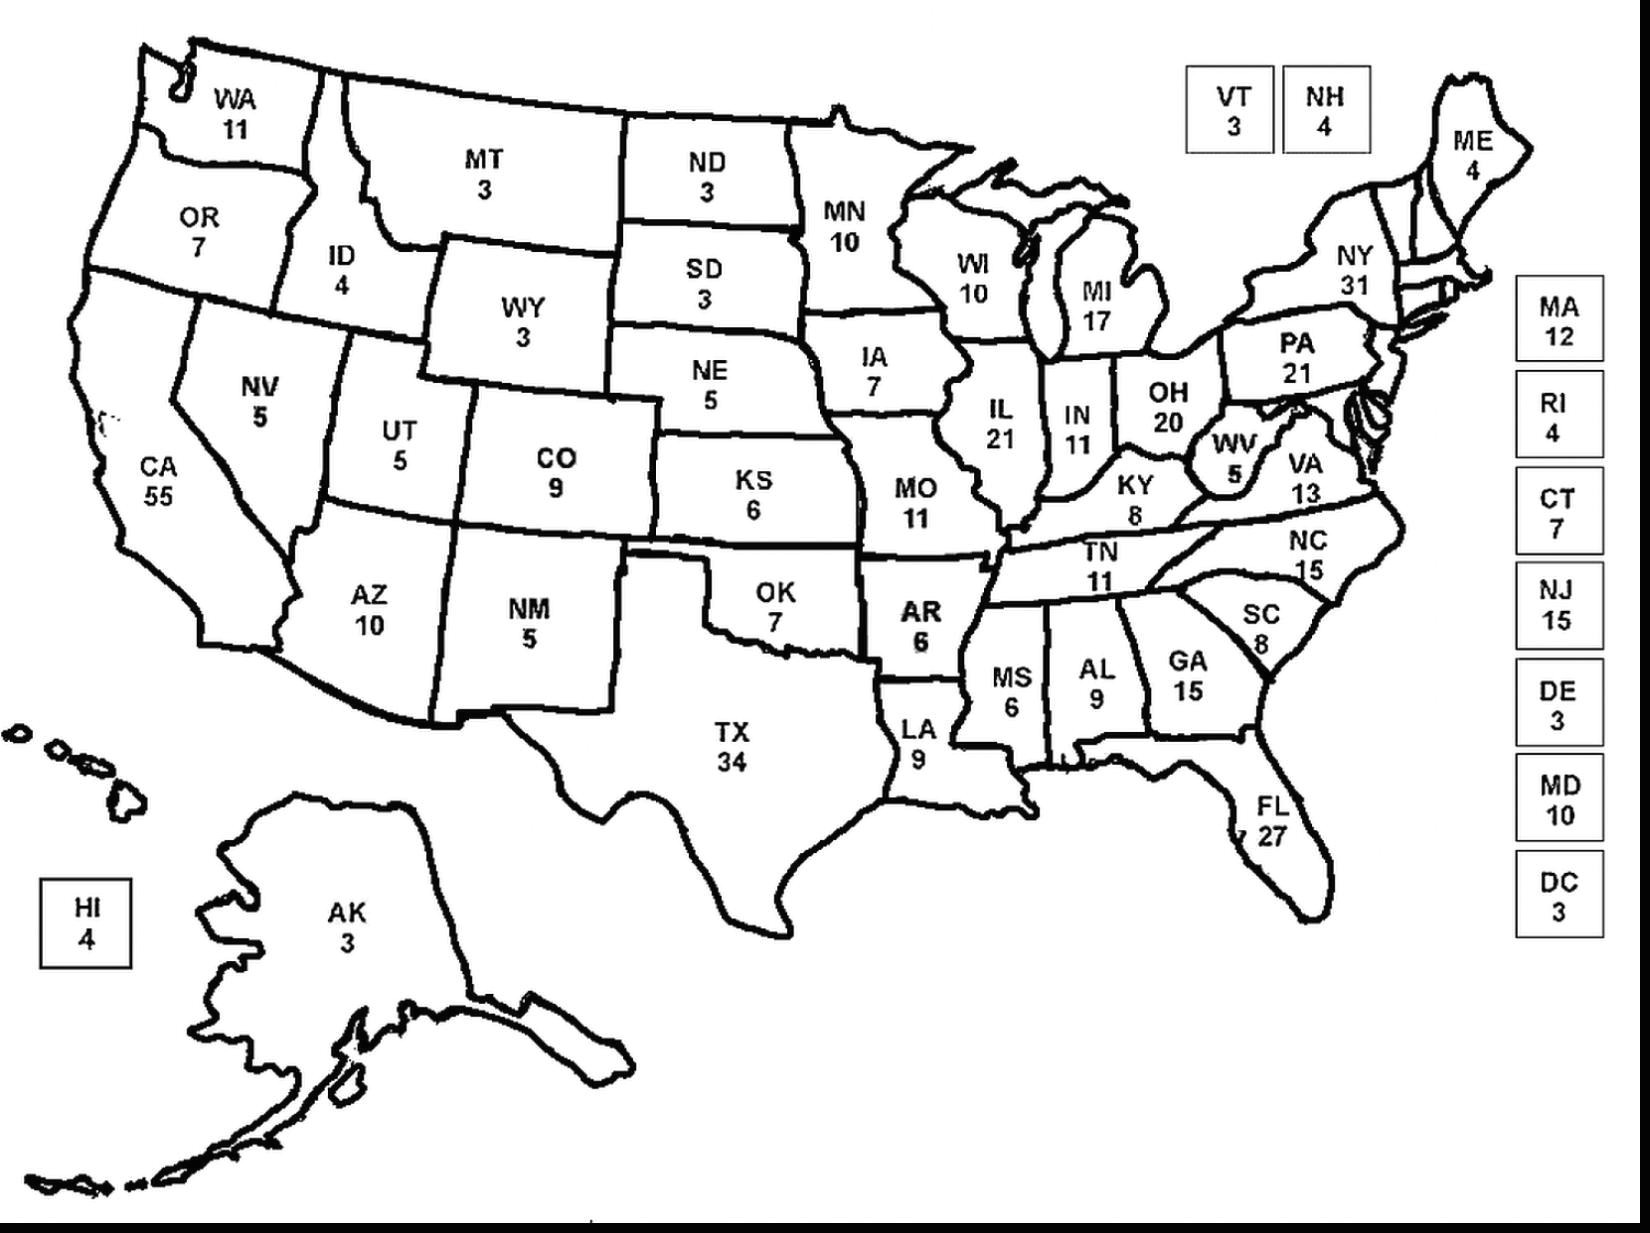 Drawing K Maps United States Map Drawing Valid Drawings the United States Map 2018